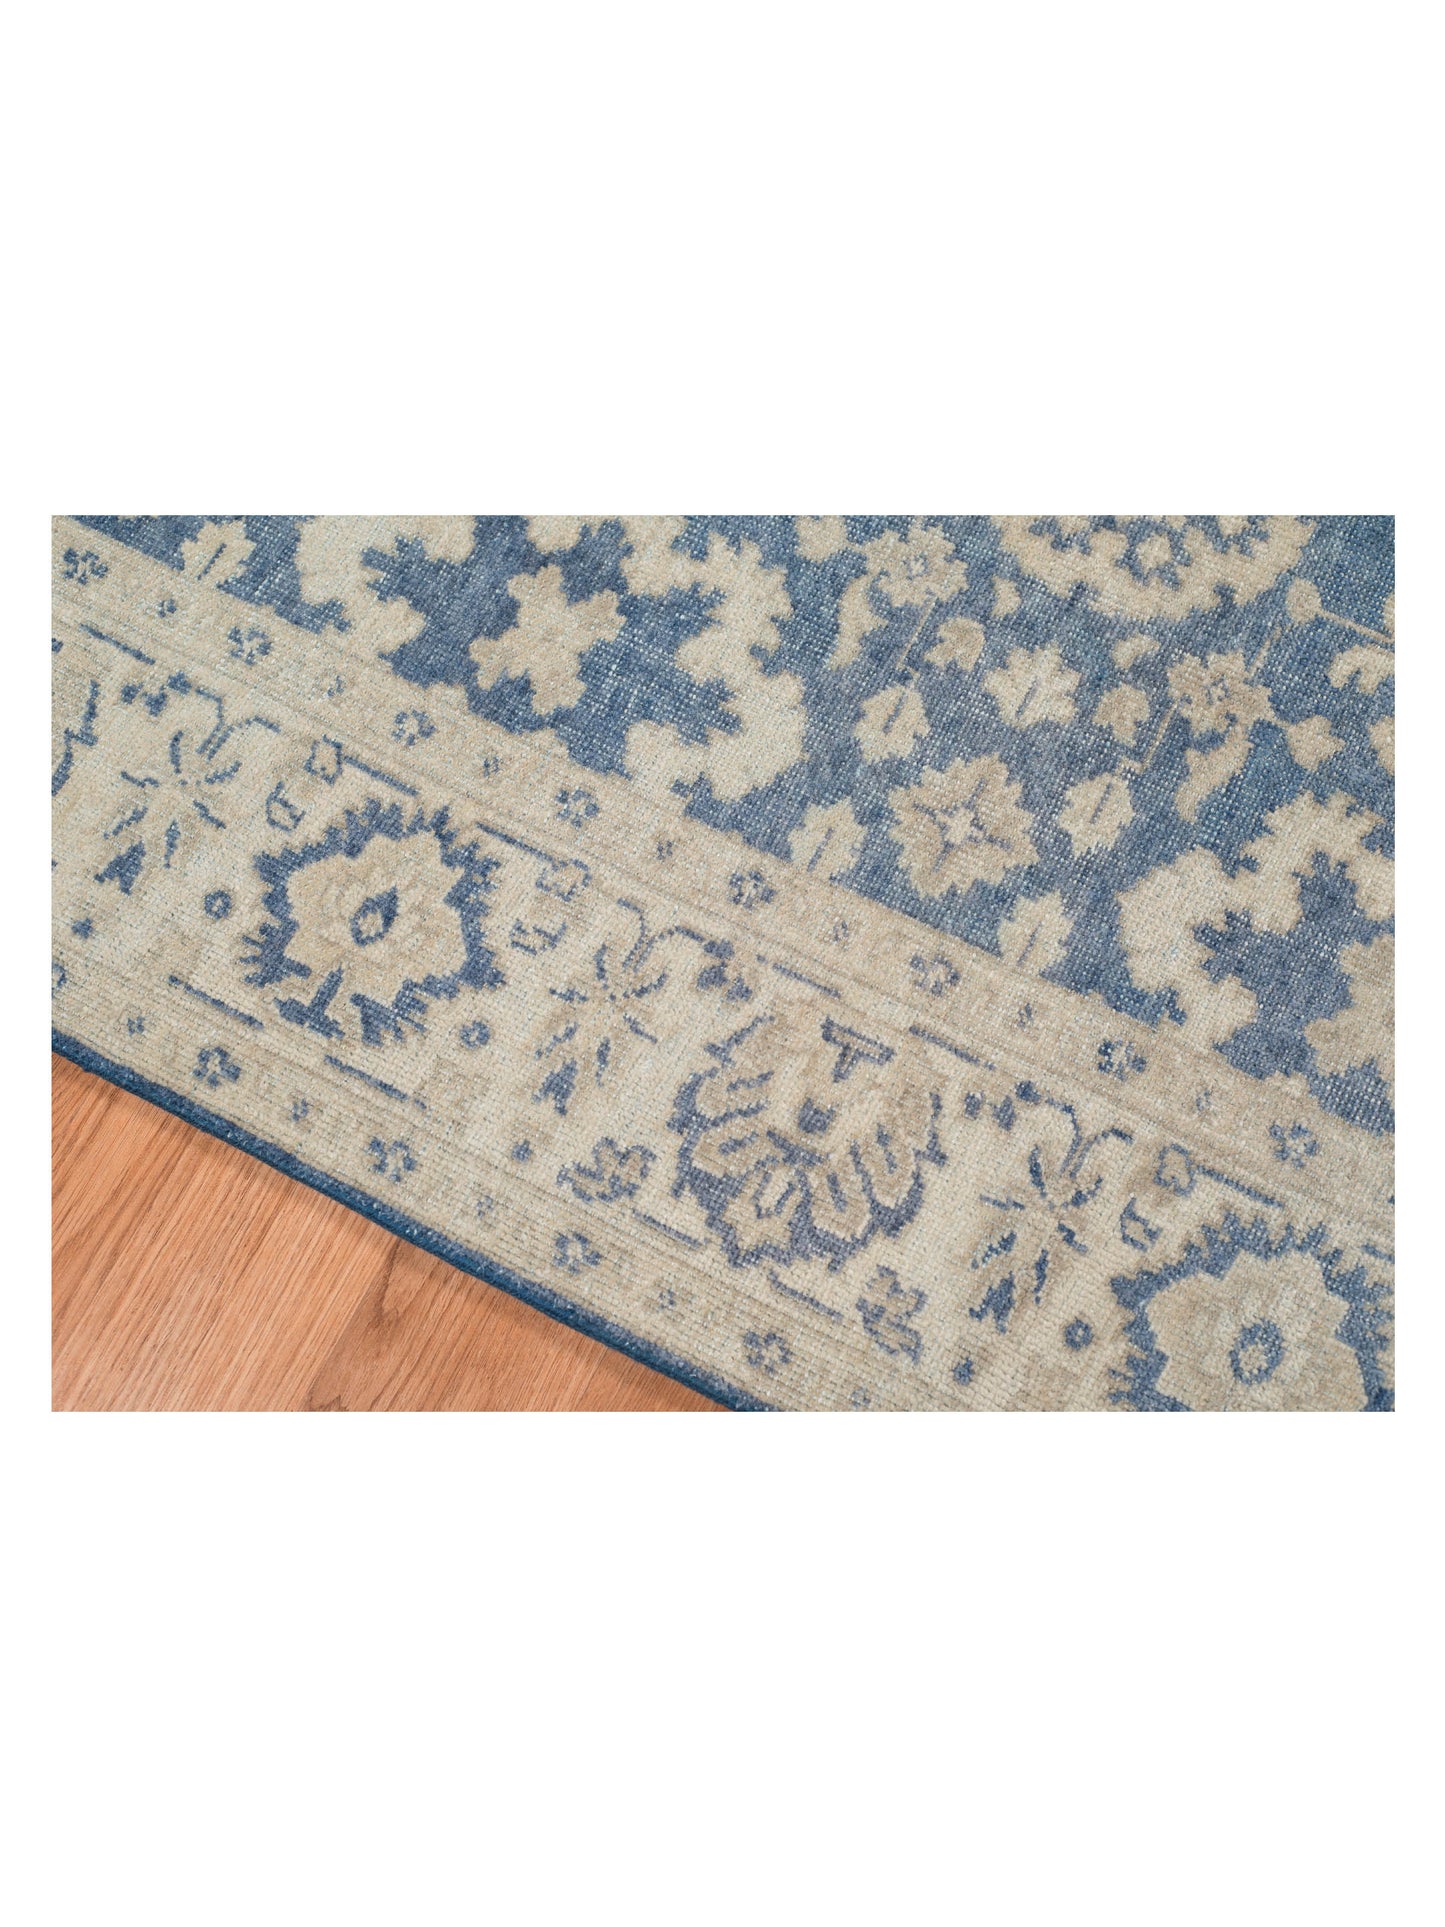 Limited ALBURY AL-551 STONE BLUE Traditional Knotted Rug